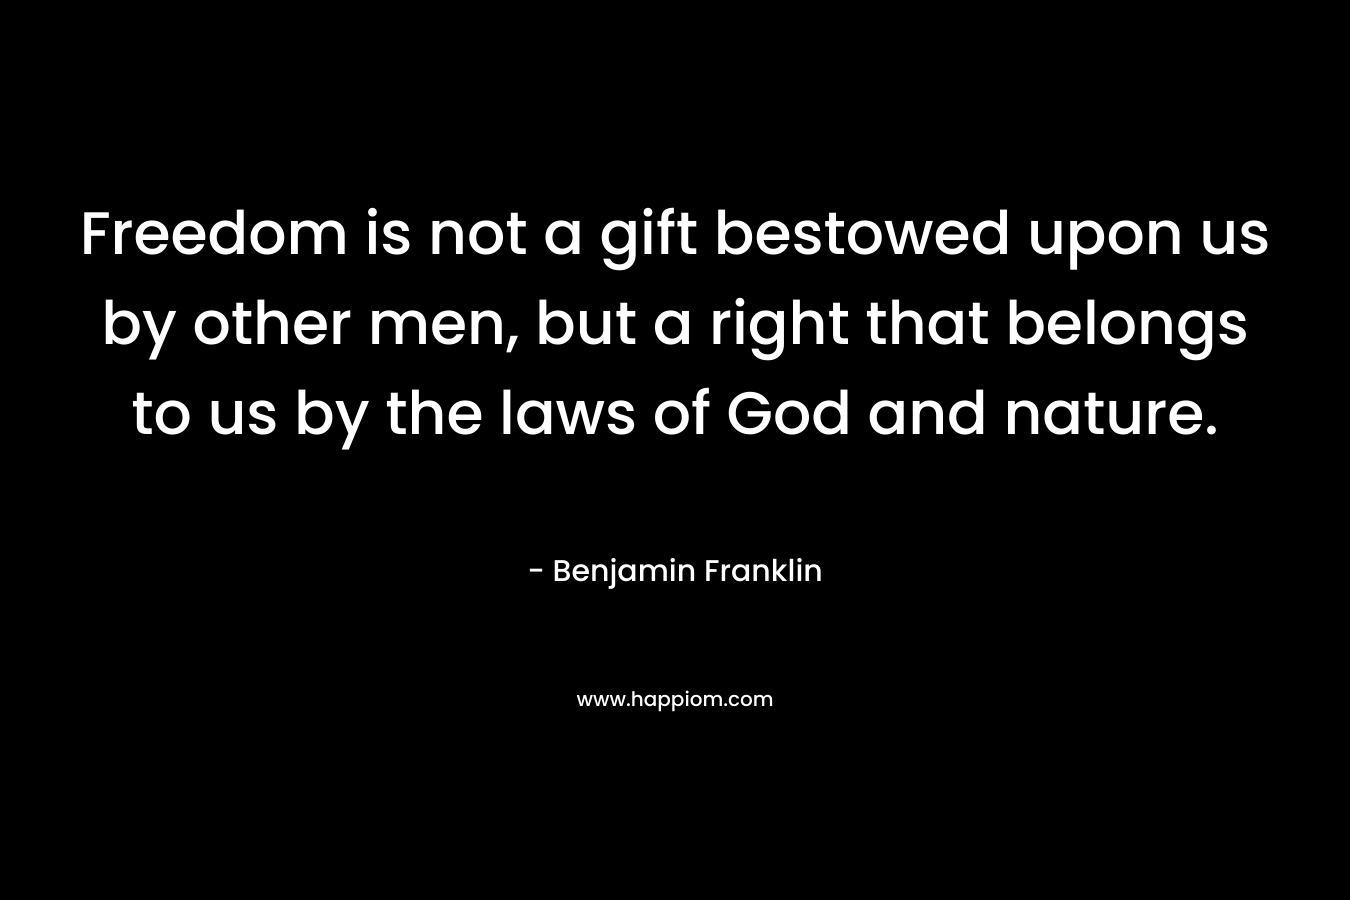 Freedom is not a gift bestowed upon us by other men, but a right that belongs to us by the laws of God and nature. – Benjamin Franklin